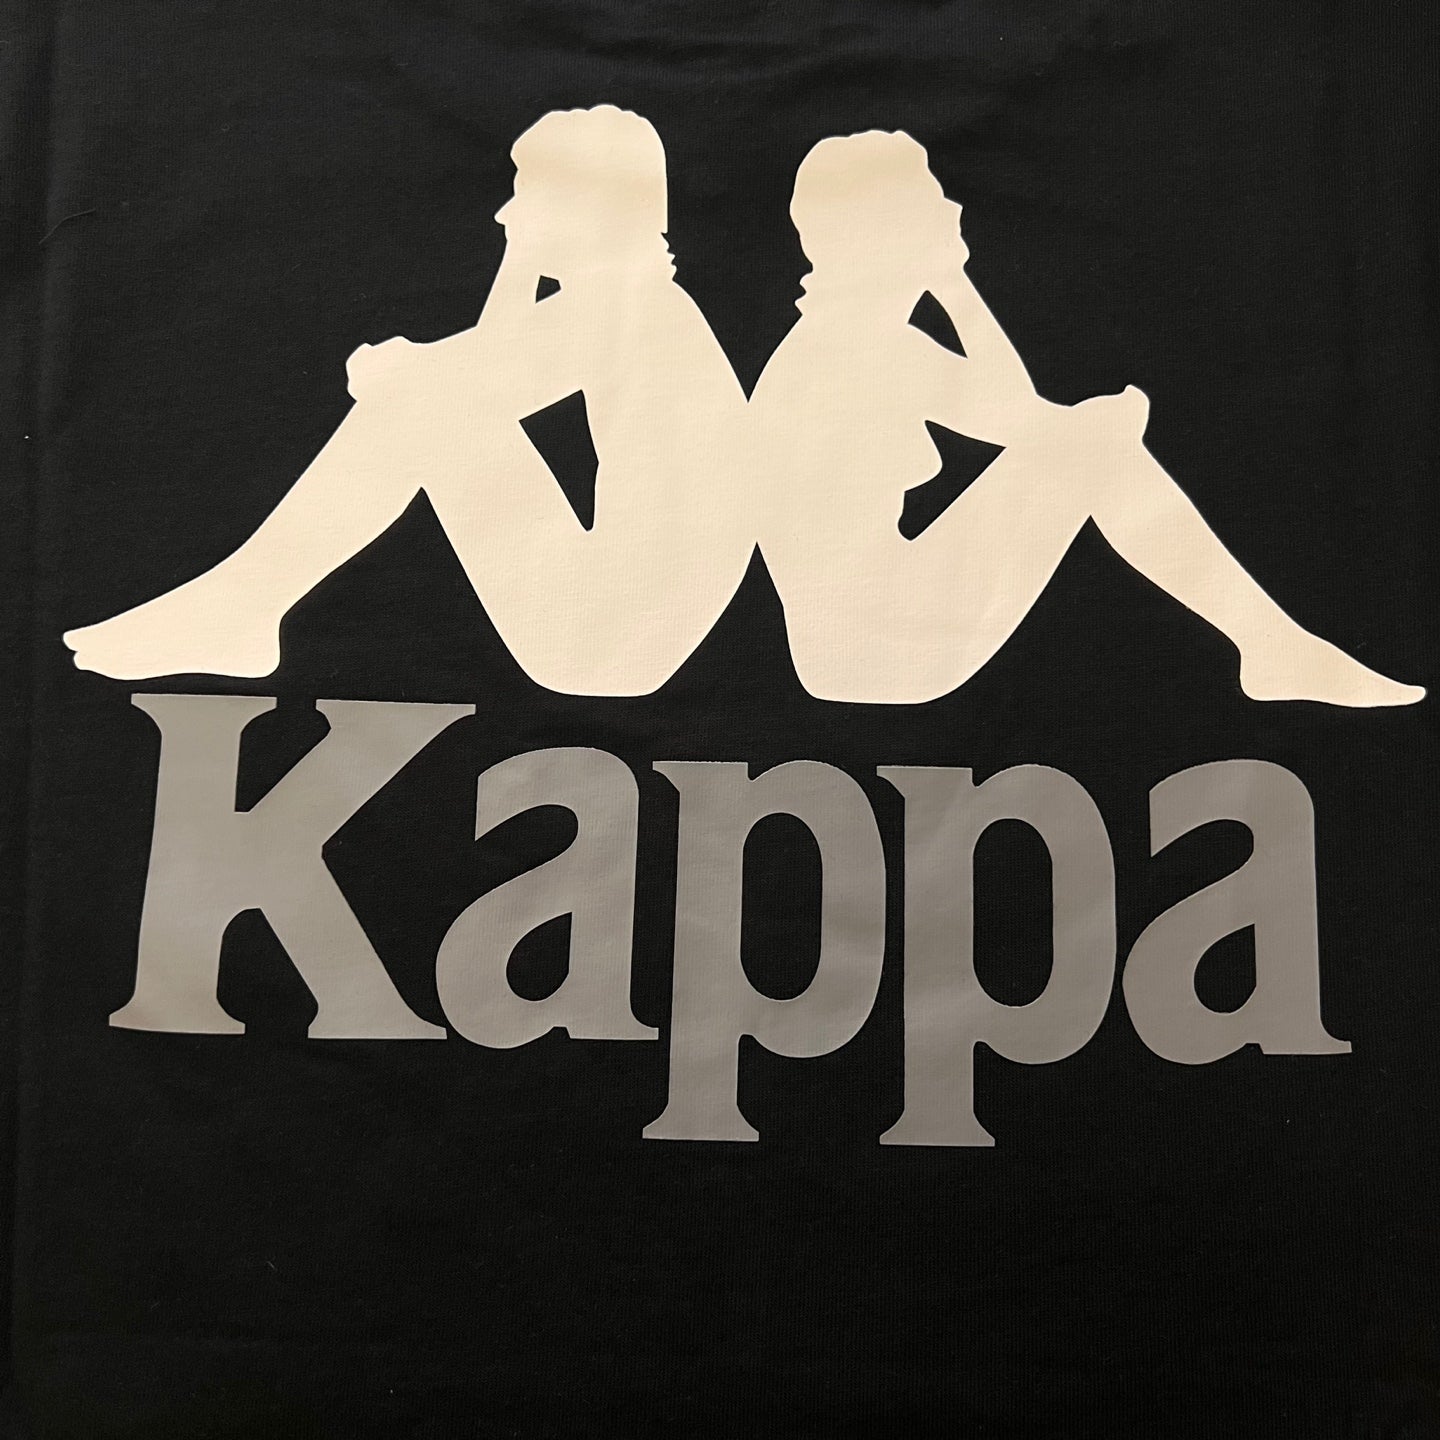 KAPPA Authentic Ables T-Shirt